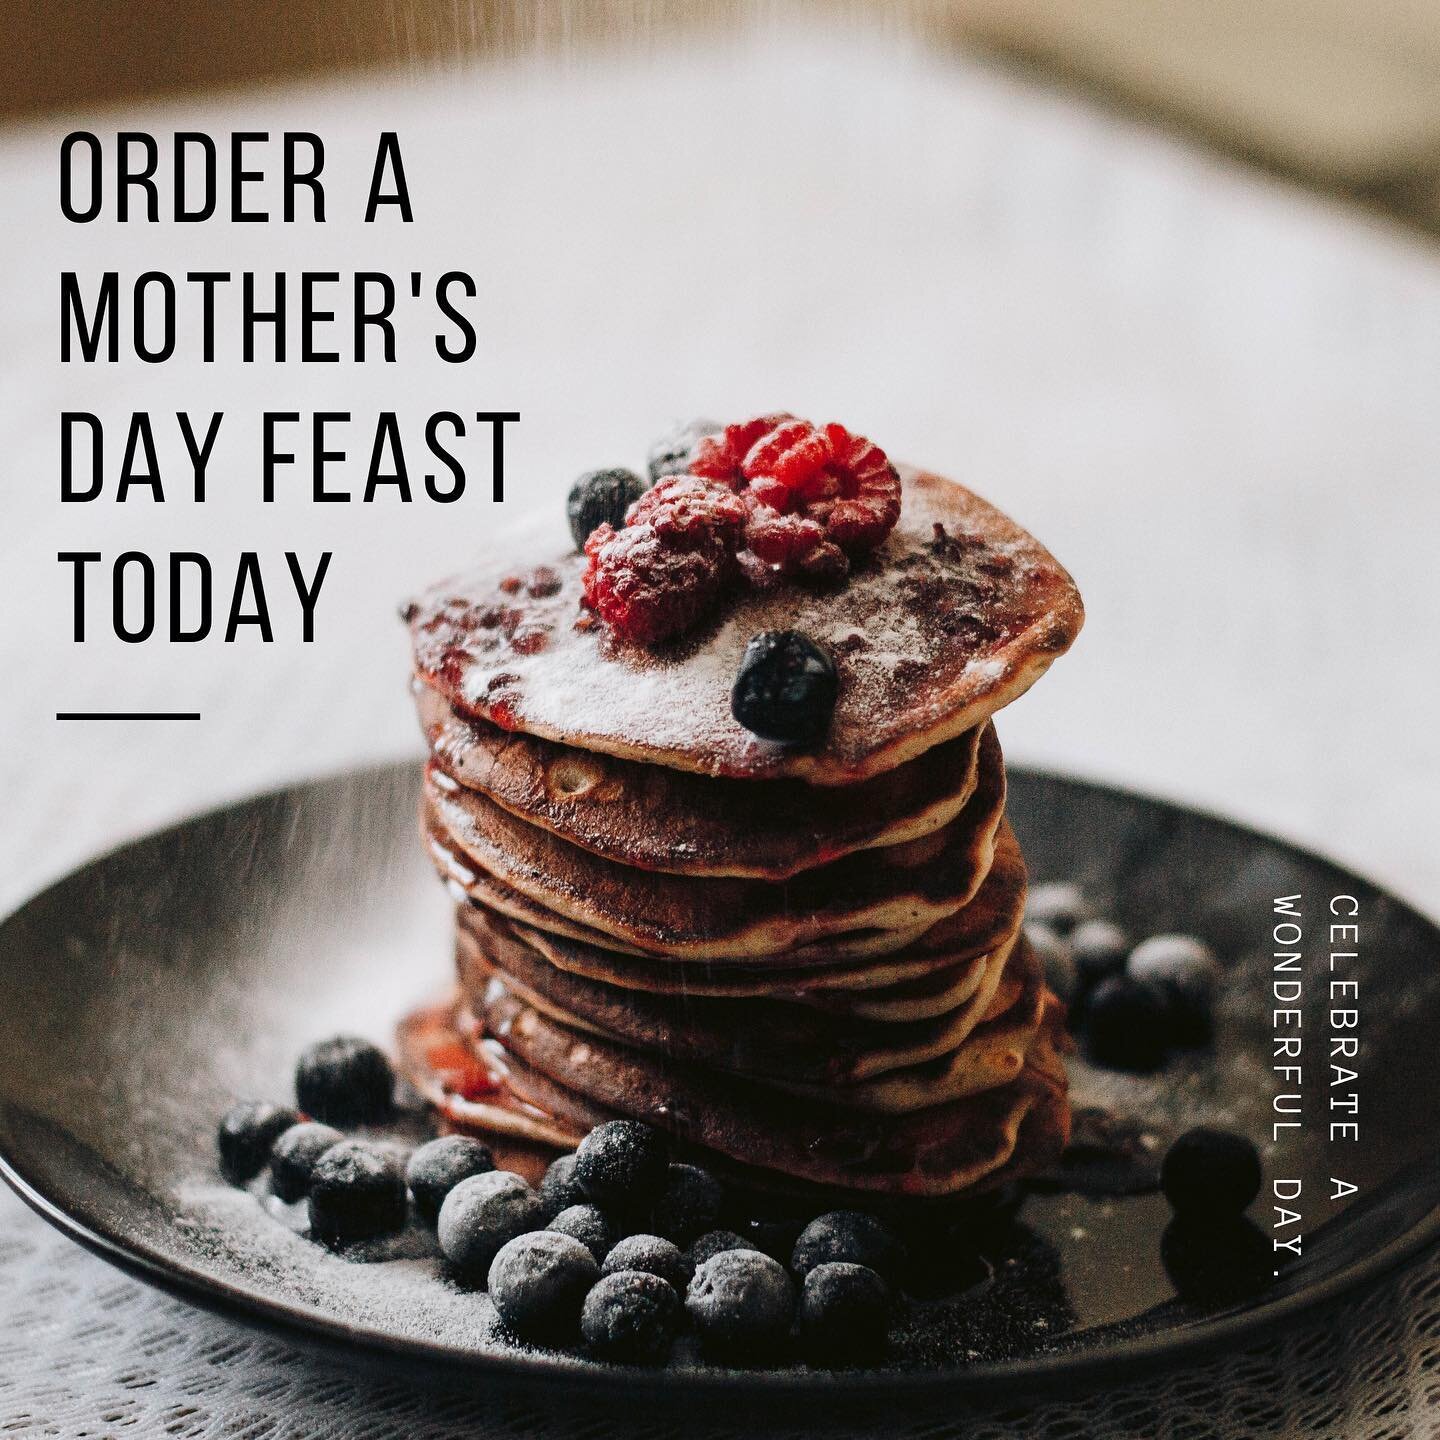 It&rsquo;s one week until Mother&rsquo;s Day and we&rsquo;ve got some amazing Mother&rsquo;s Day brunch and dinner options, such as 🥞
Egg Benedict Kits
Pancake platter with blueberry maple syrup
Caesar Mocktail Mix
And more
🥞
Make sure to pre-order